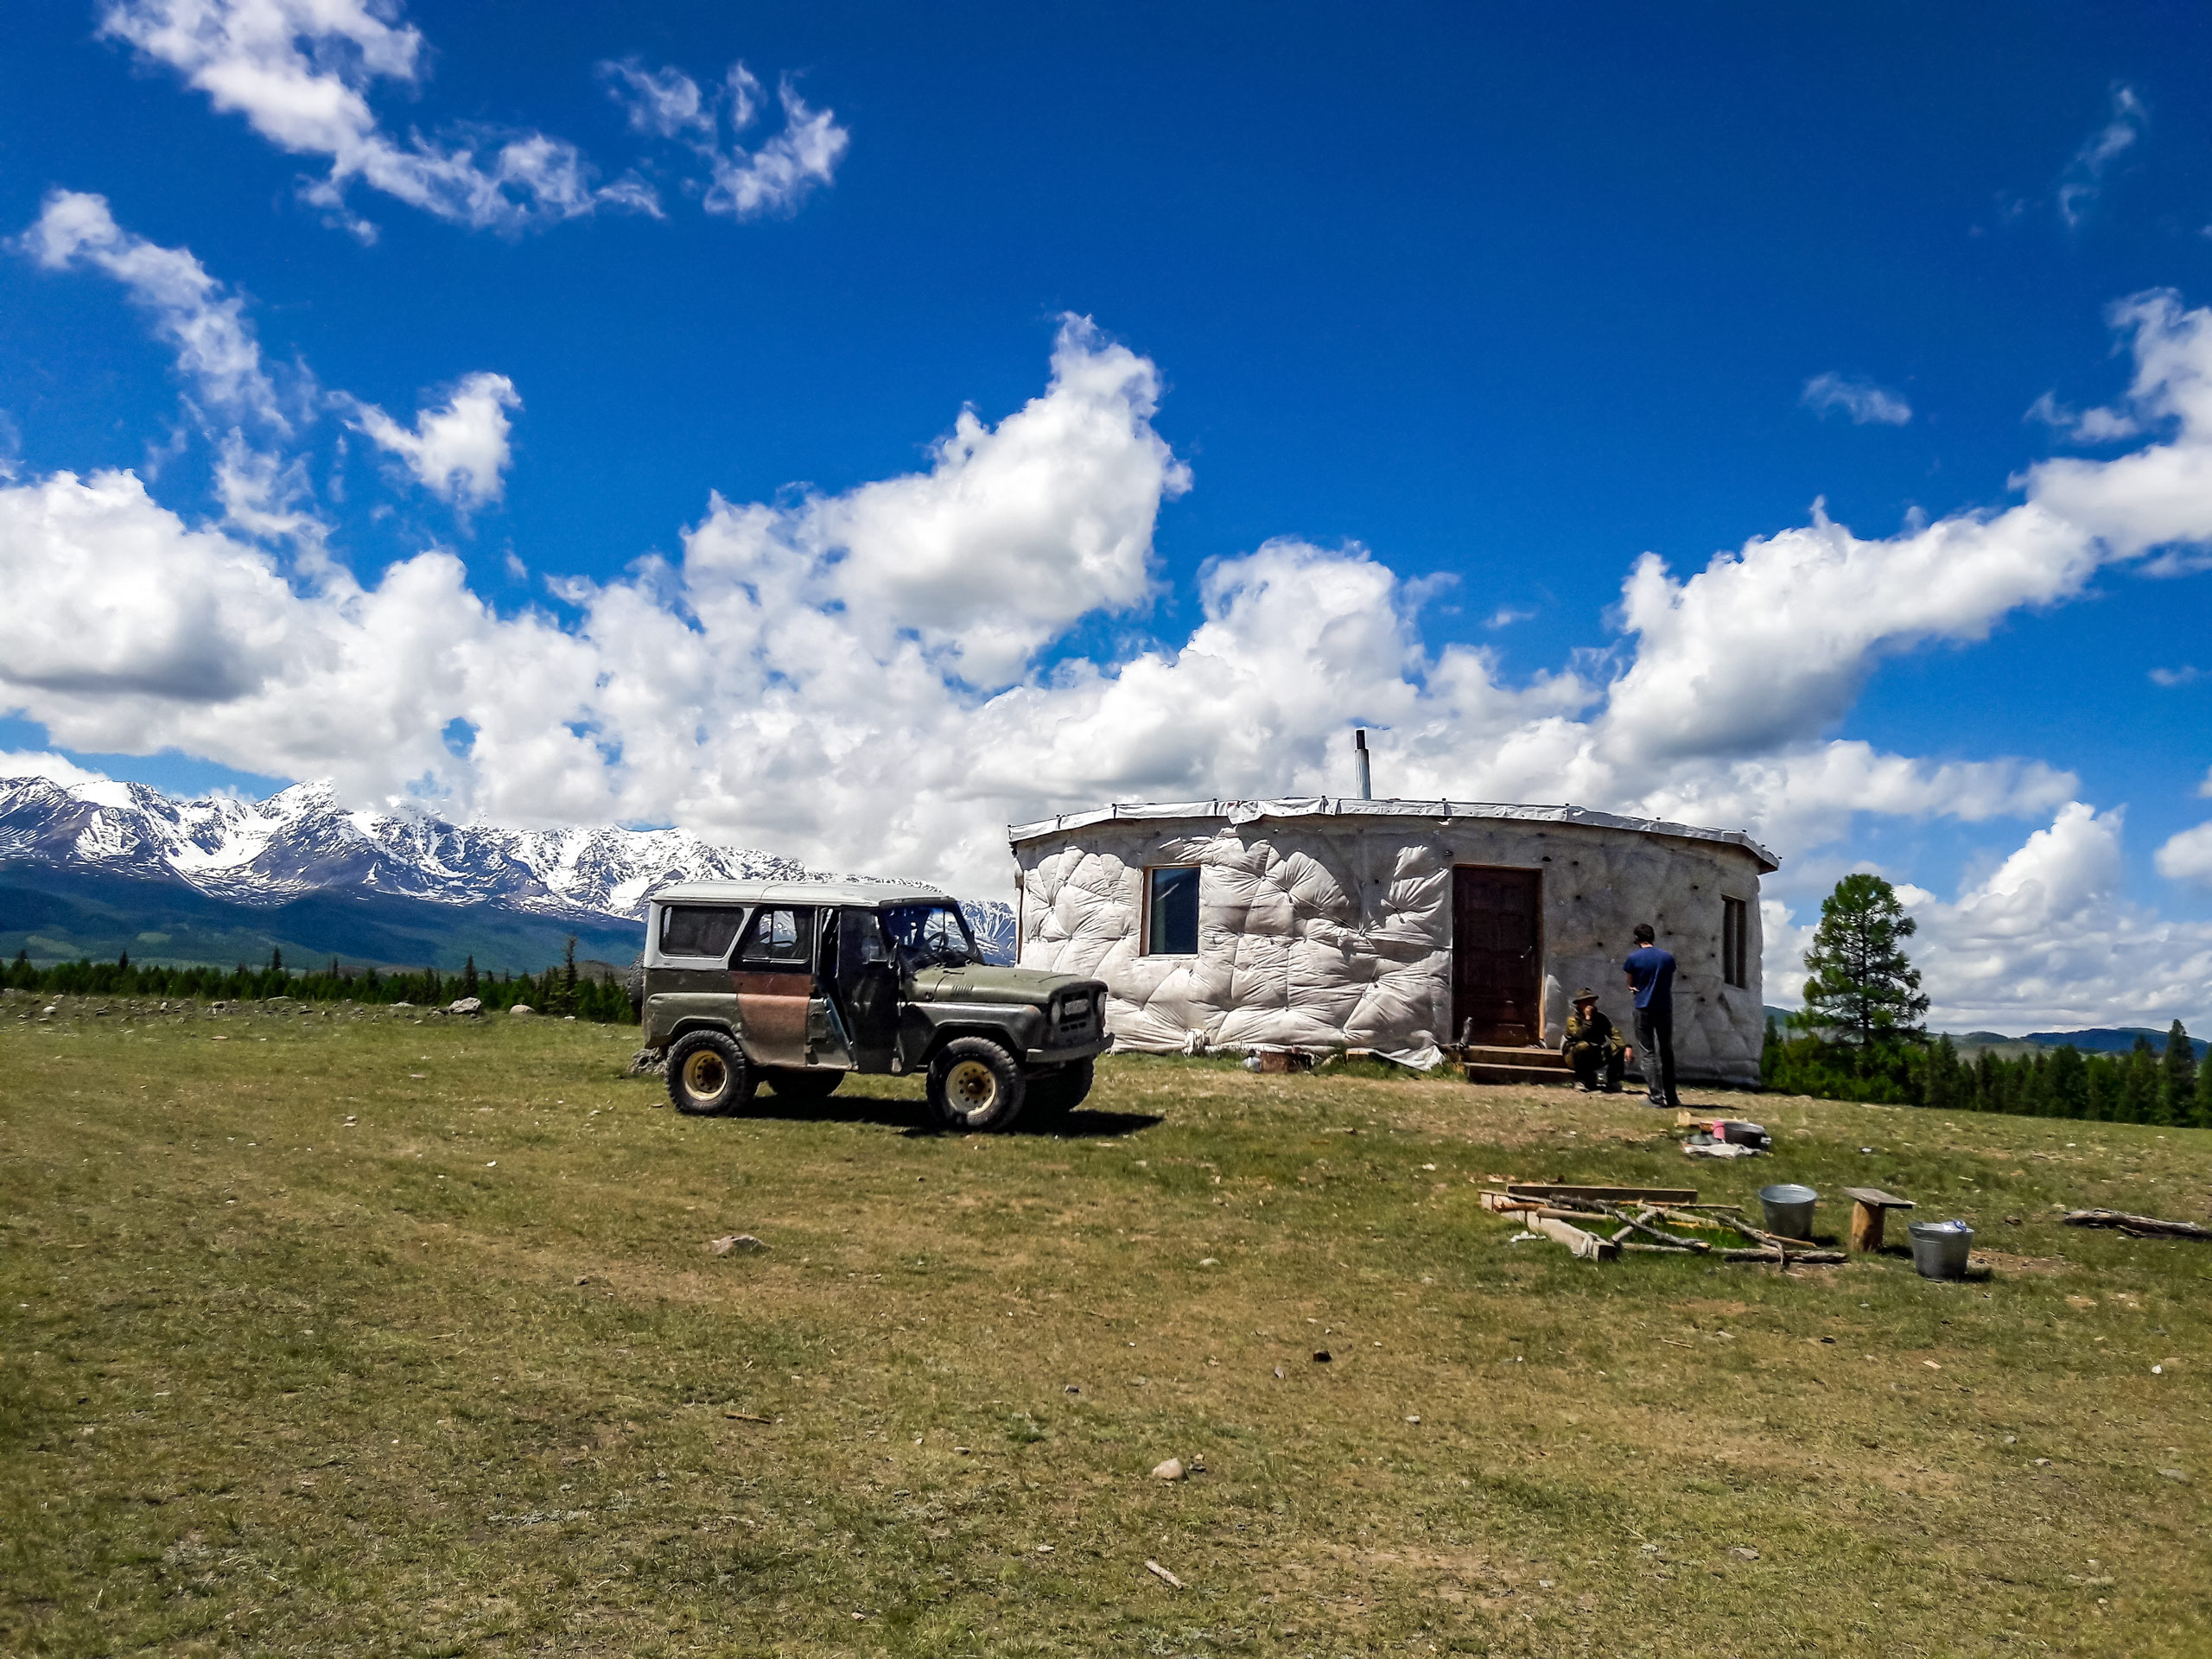 Safari jeep all terrain vehicle parked beside yurt shelter in Altai mountains Russia